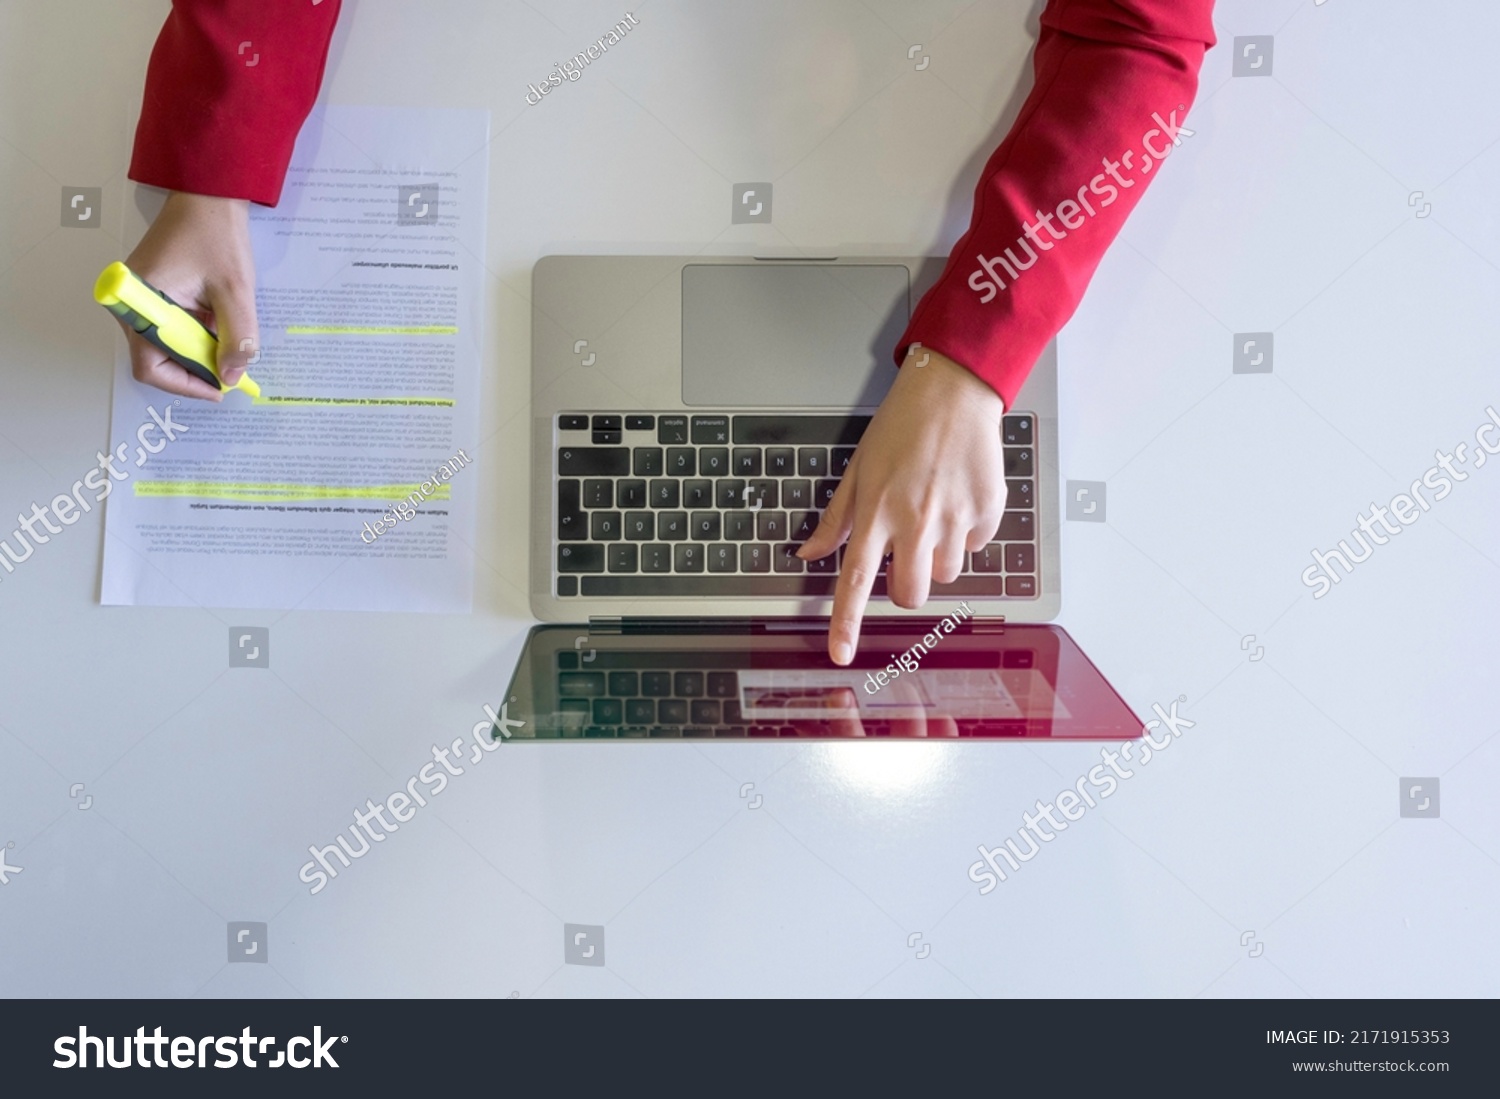 Holding highlighter pen, top view of woman hand holding highlighter pen. Working on laptop and highlighting or marking important text on working paper, isolated on white desk. #2171915353